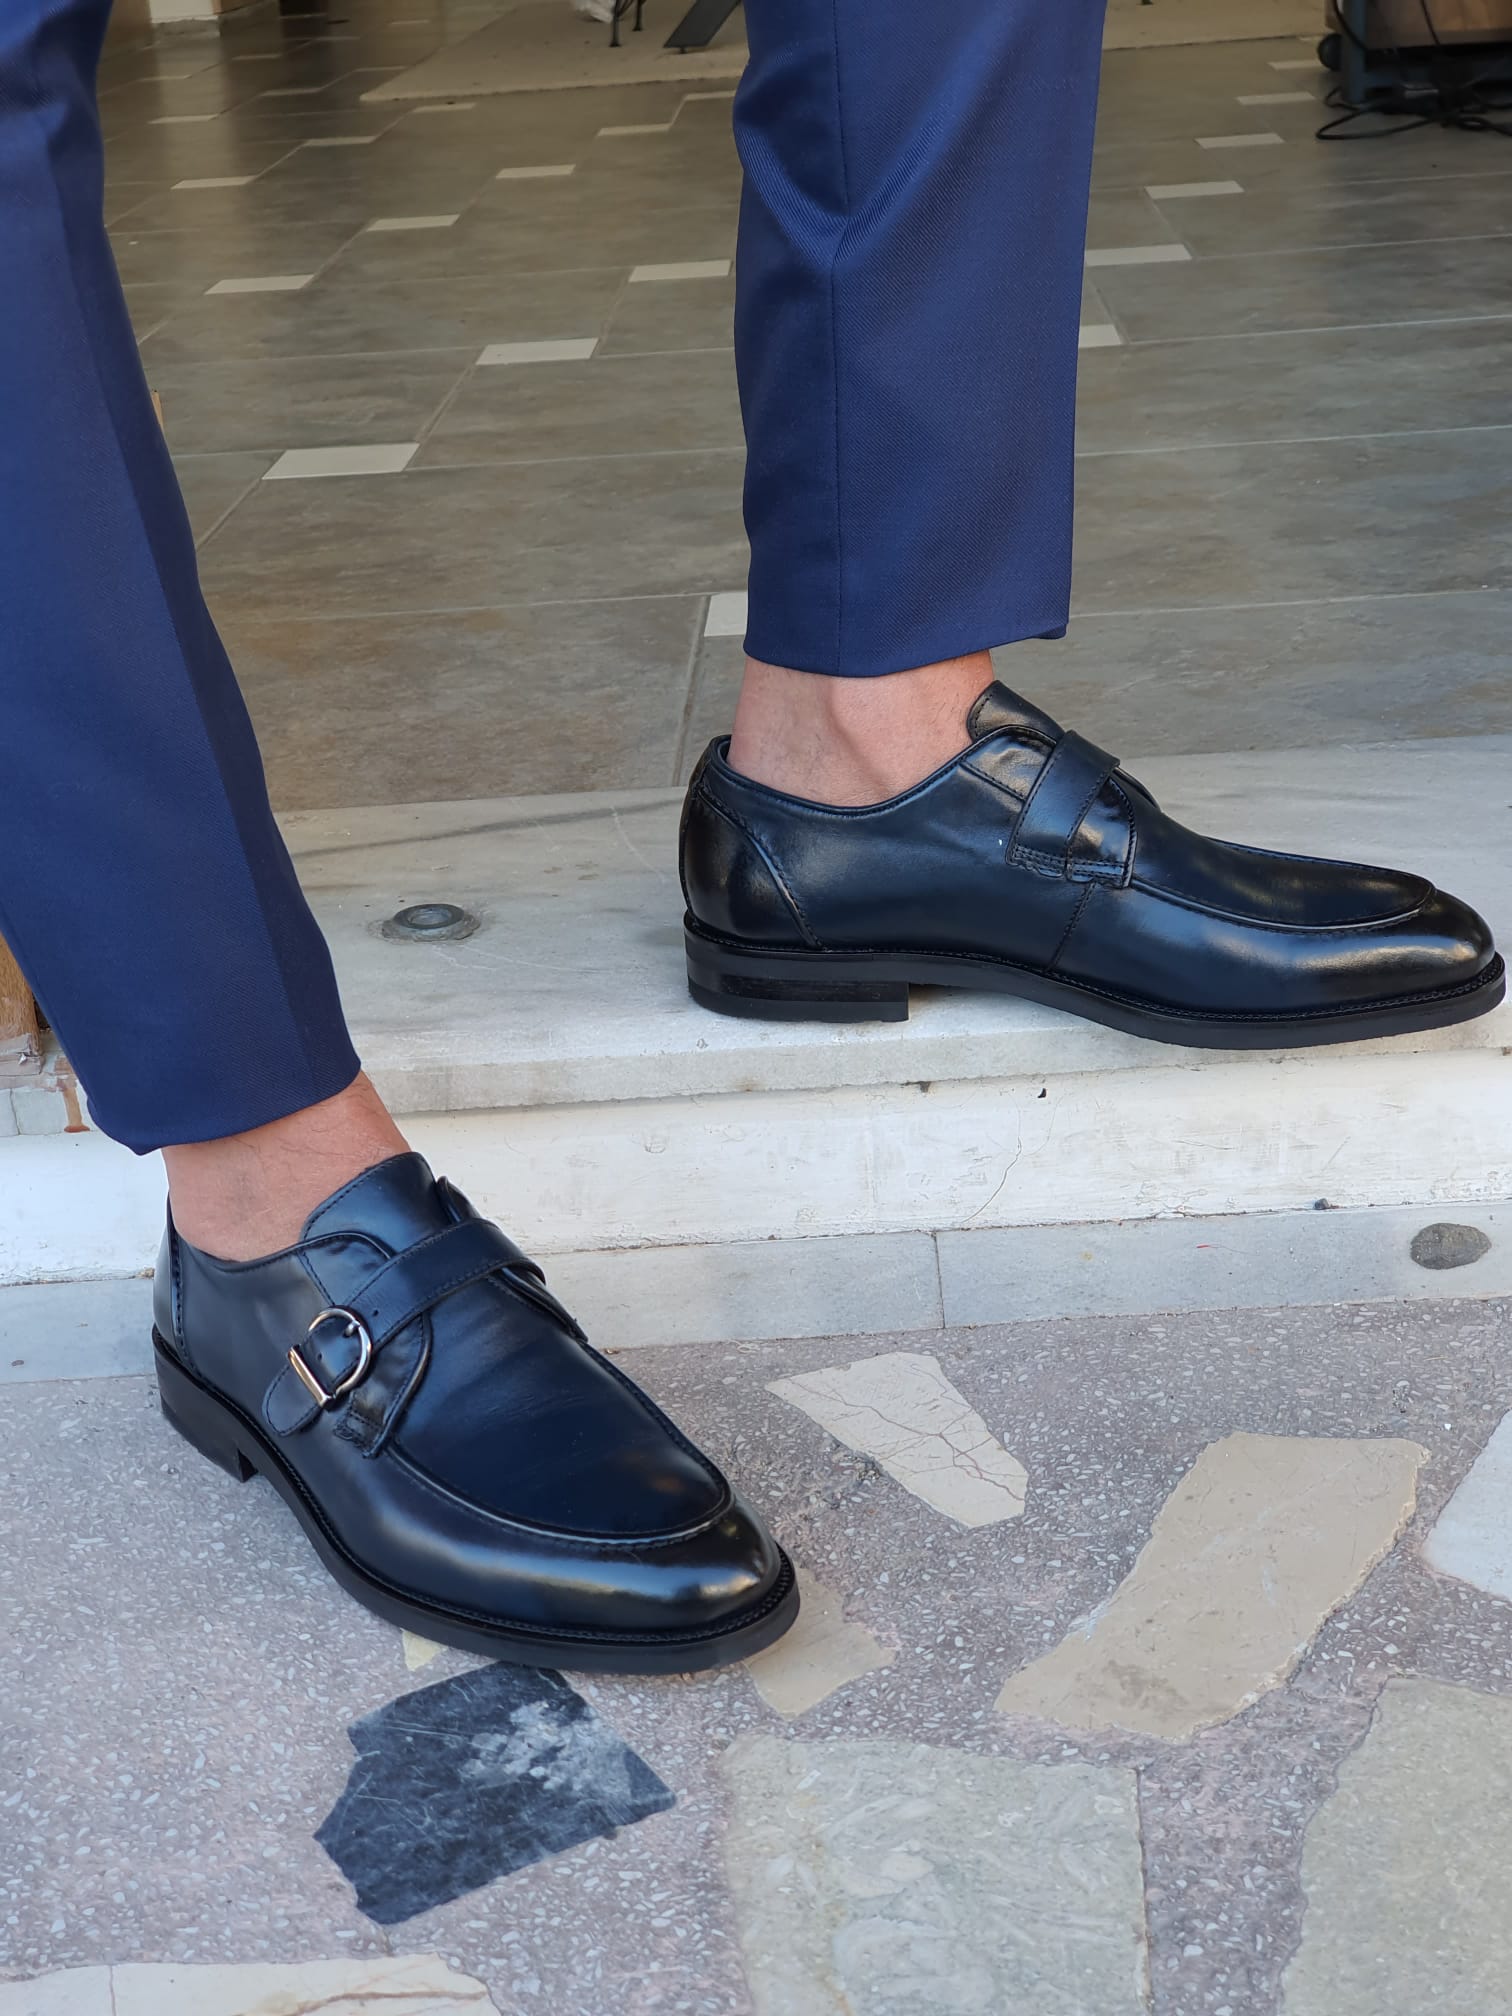 SARDINELLI NAVYBLUE WITH SINGLE DETAILED BUCKLE CLASSIC RUBBER SOLE SHOES